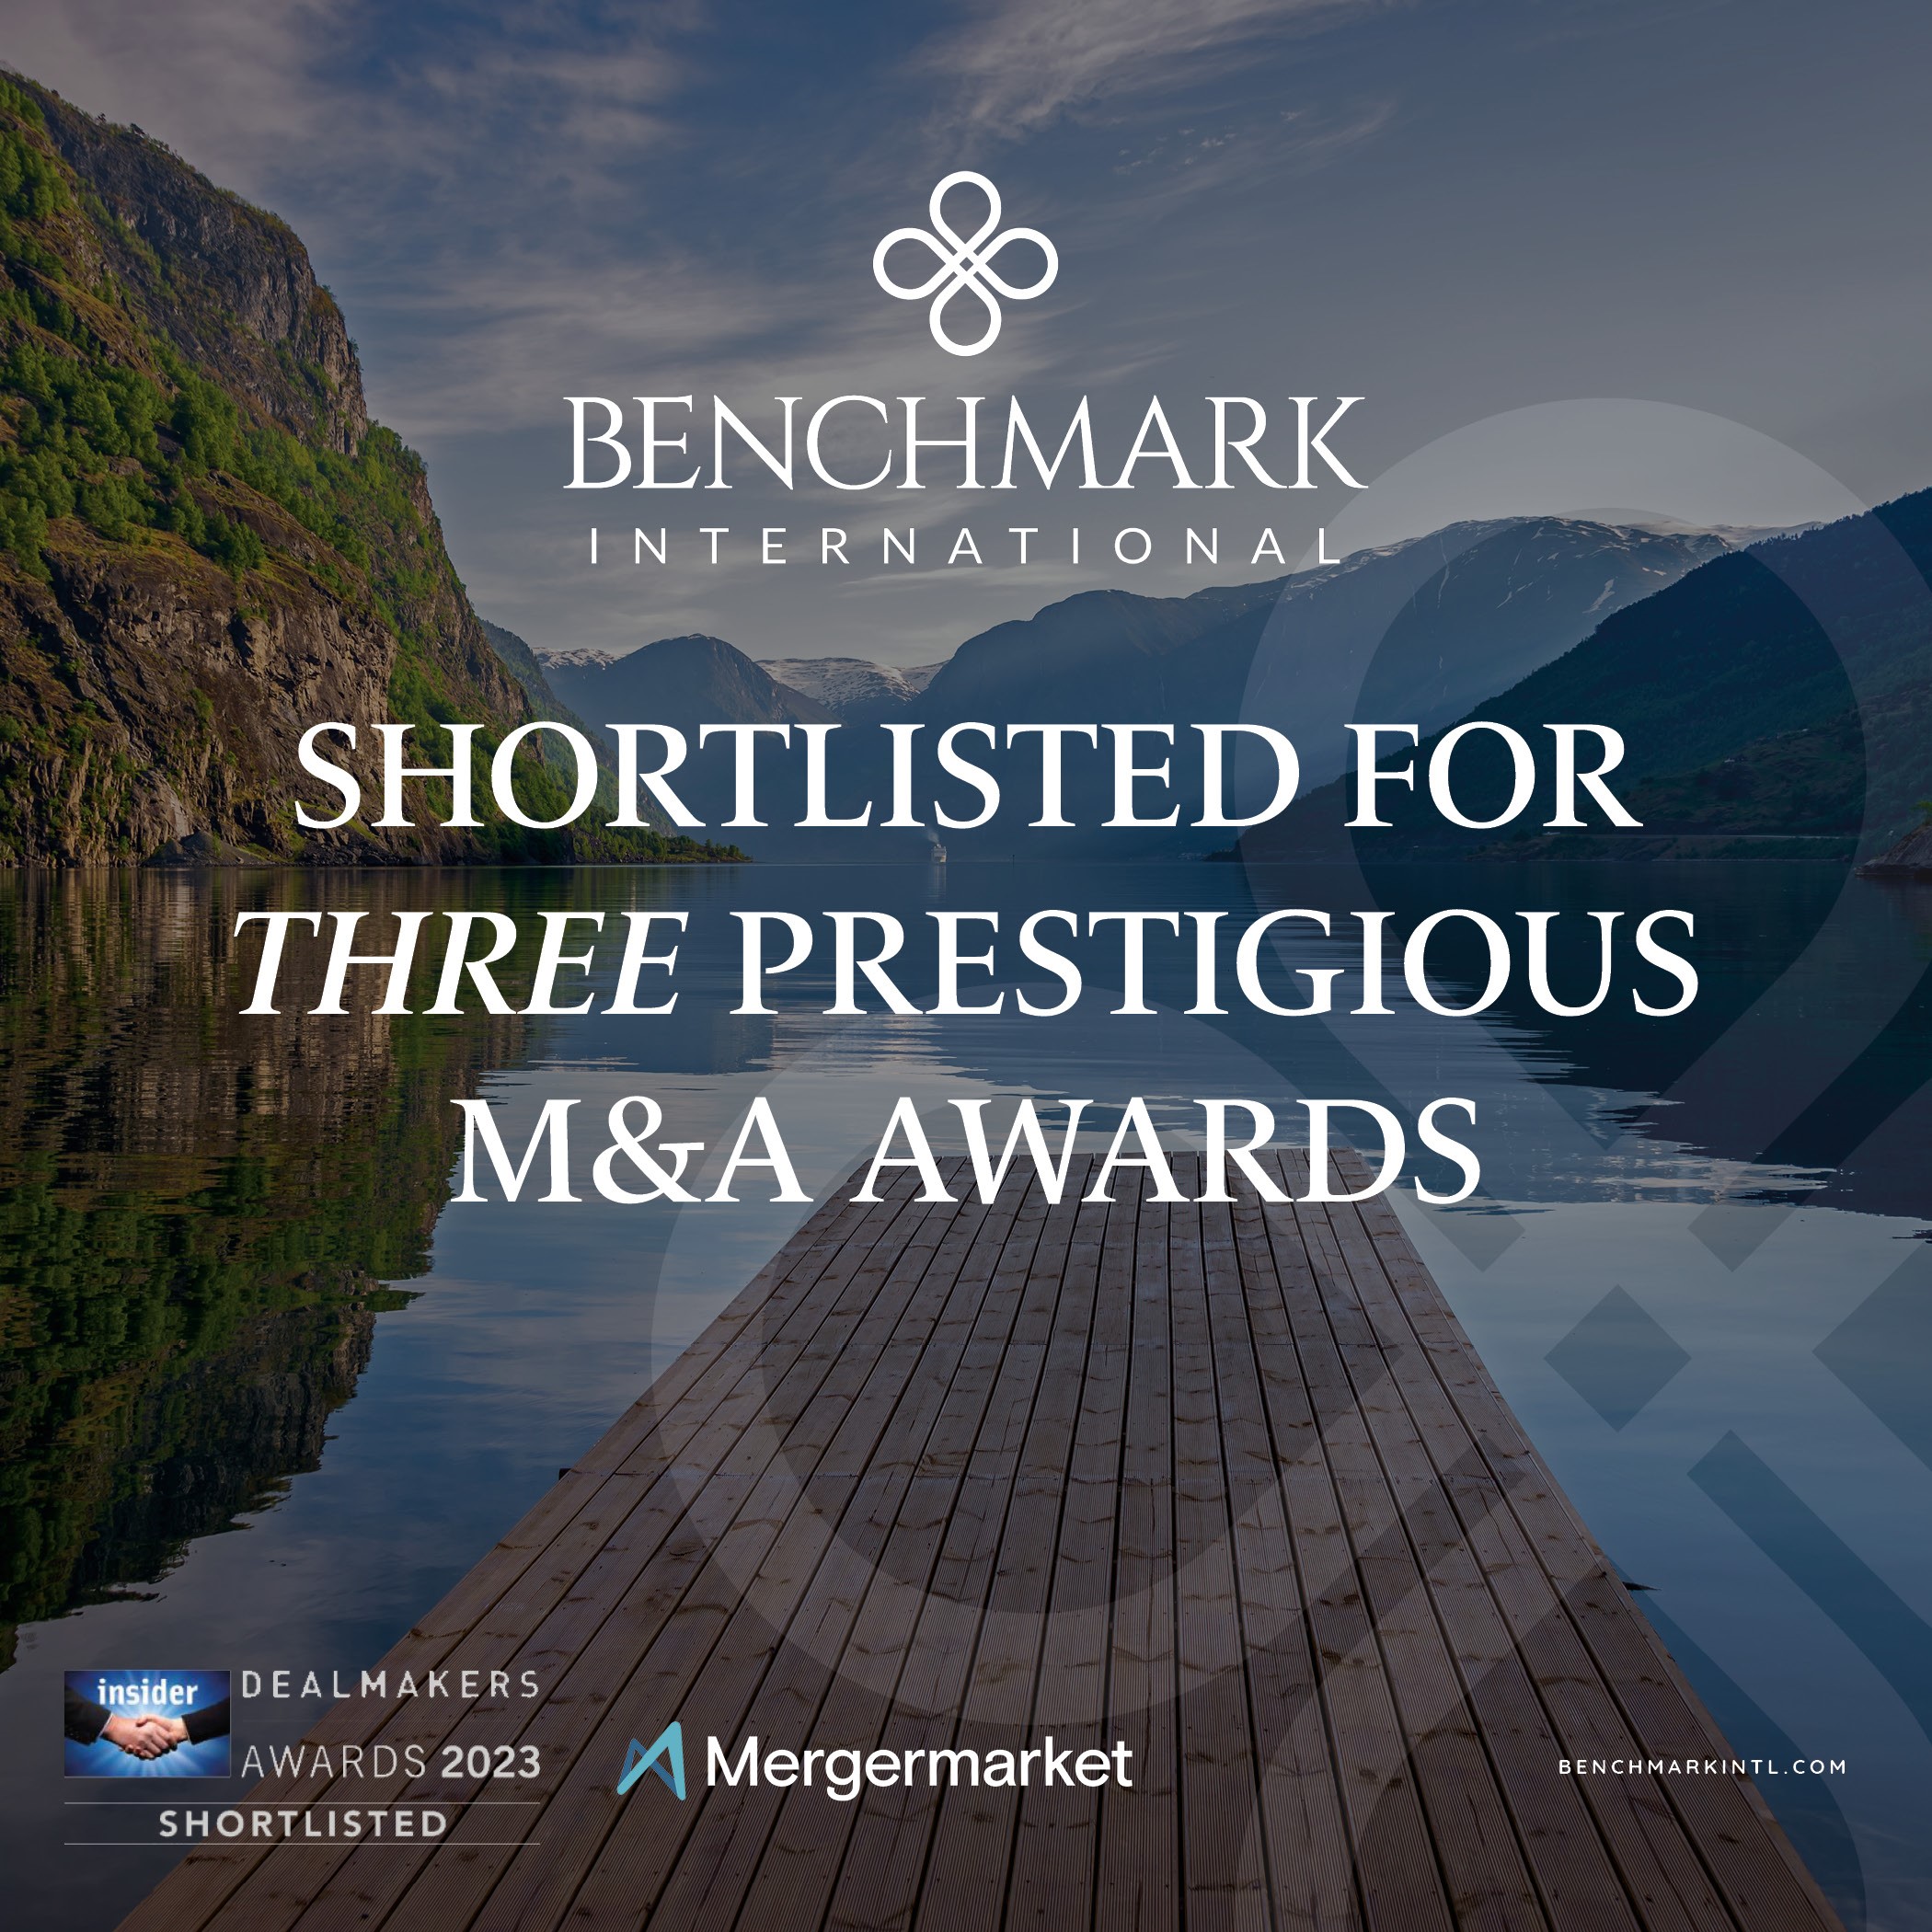 Benchmark shortlisted for 3 M&A awards